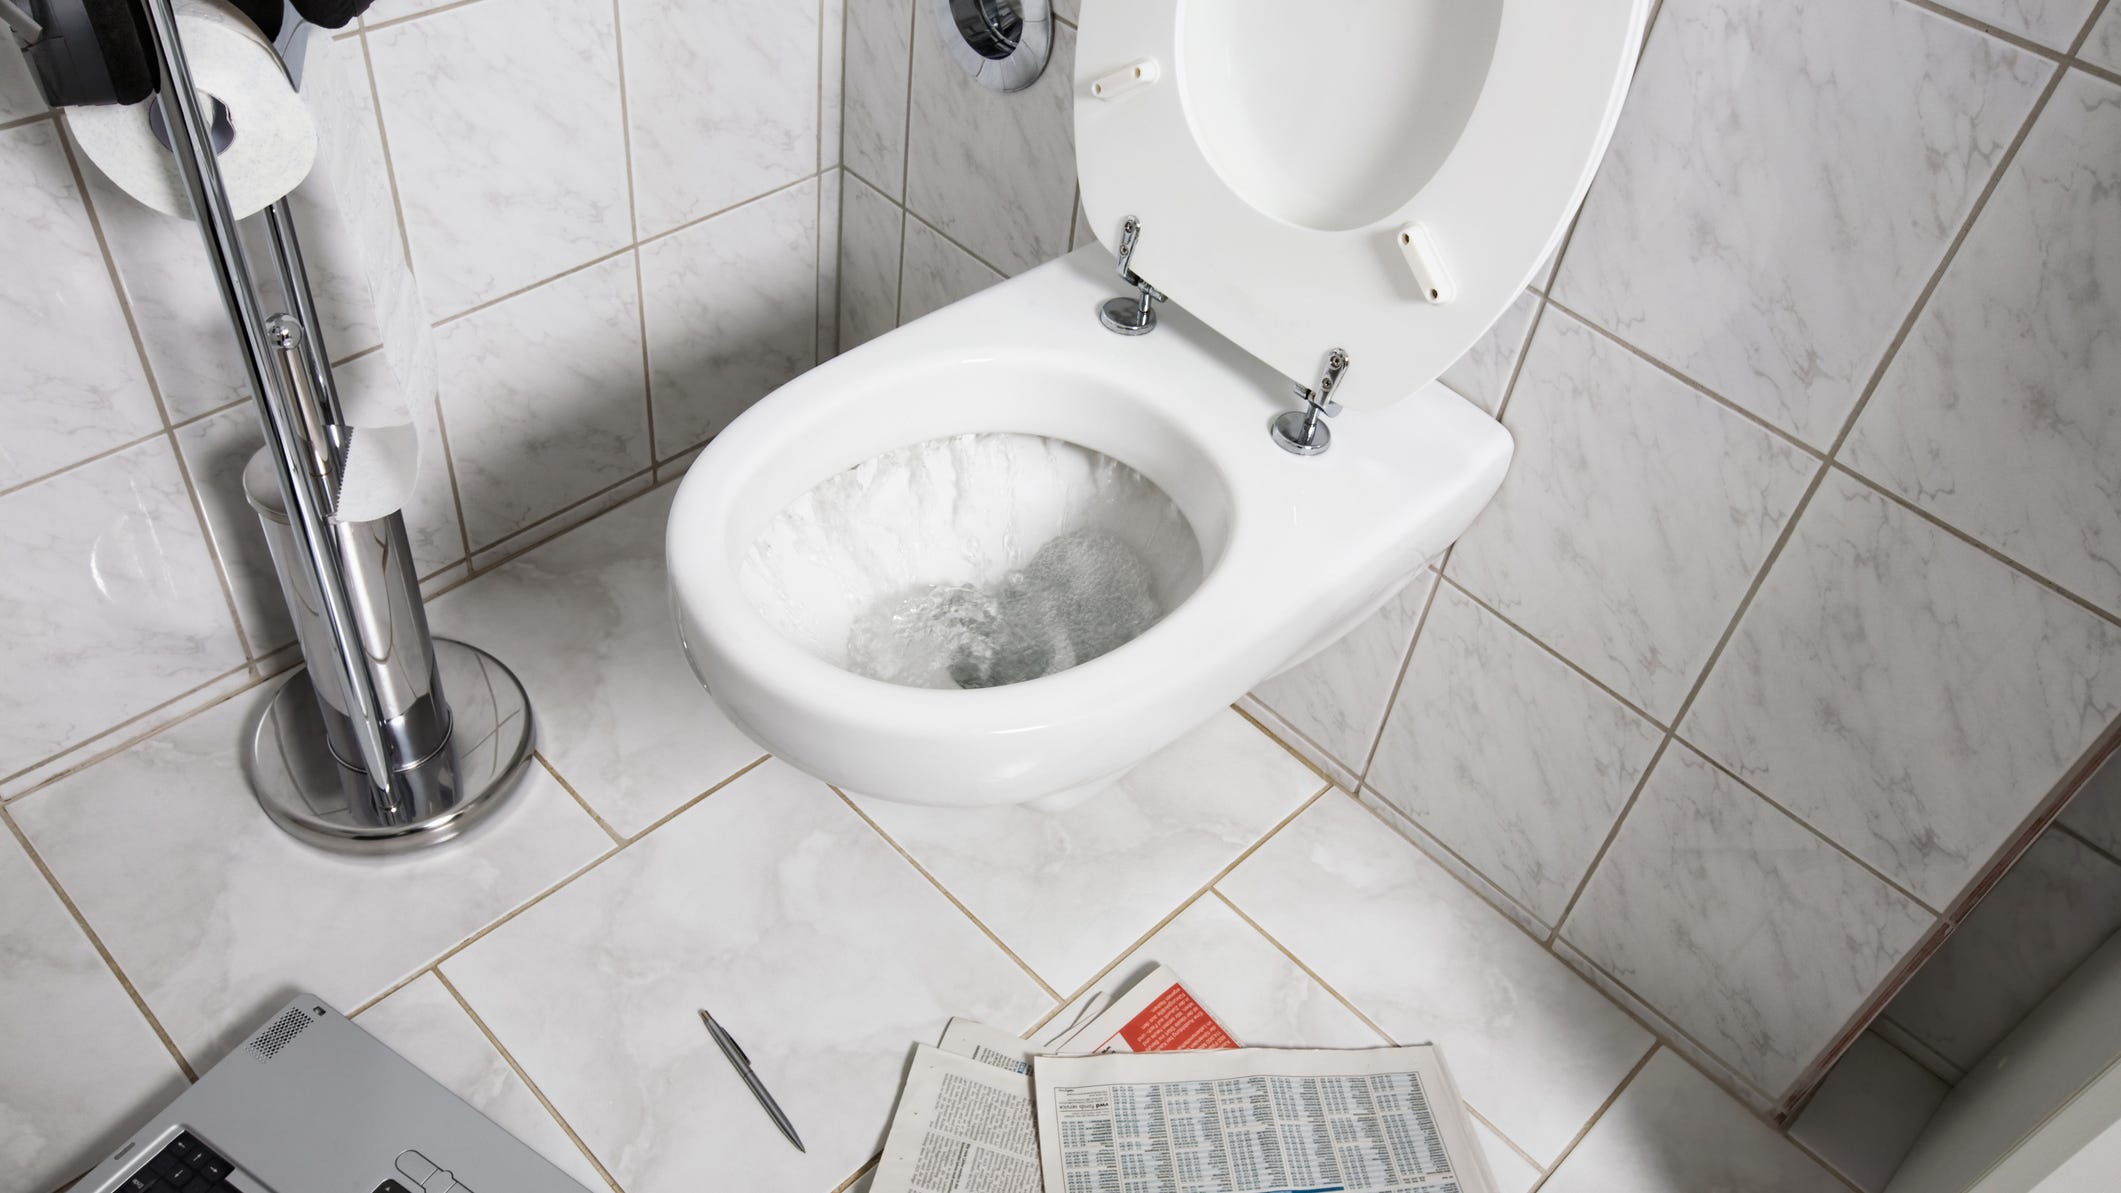 This One Habit Can Make Your Bathroom Way More Sanitary